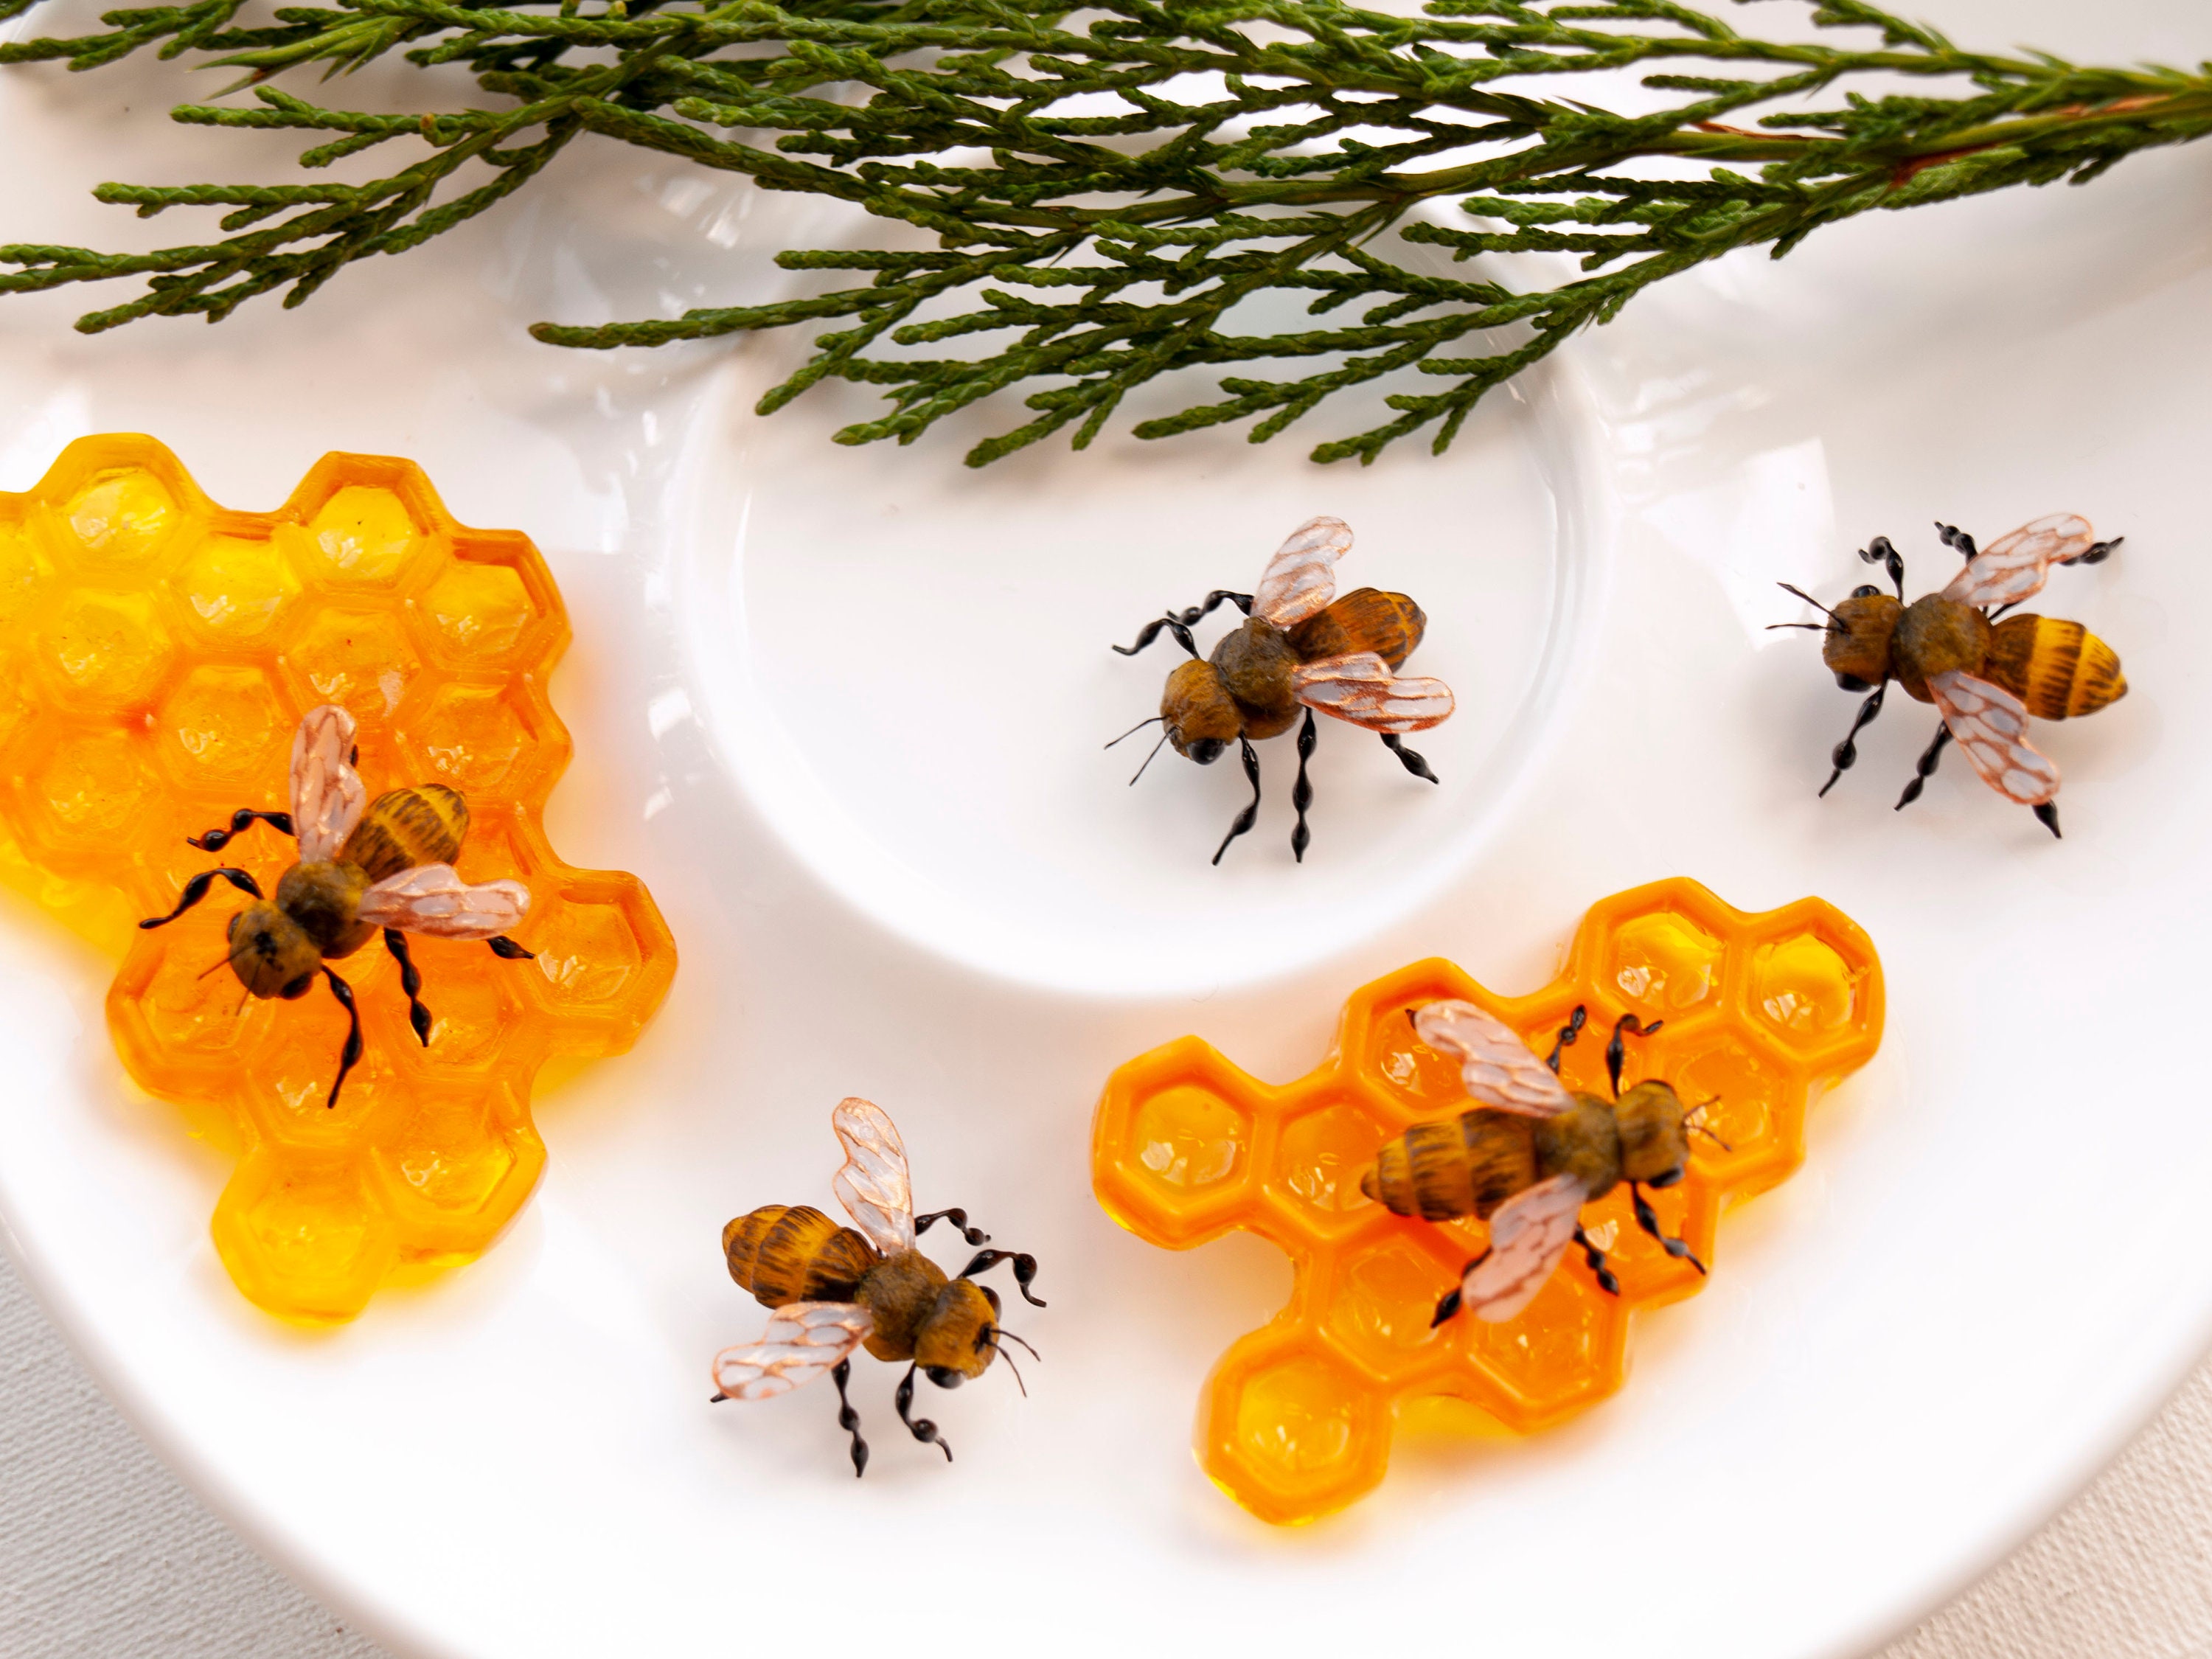 Bee Themed Gifts-That are Truly Buzz Worthy - Carolina Honeybees